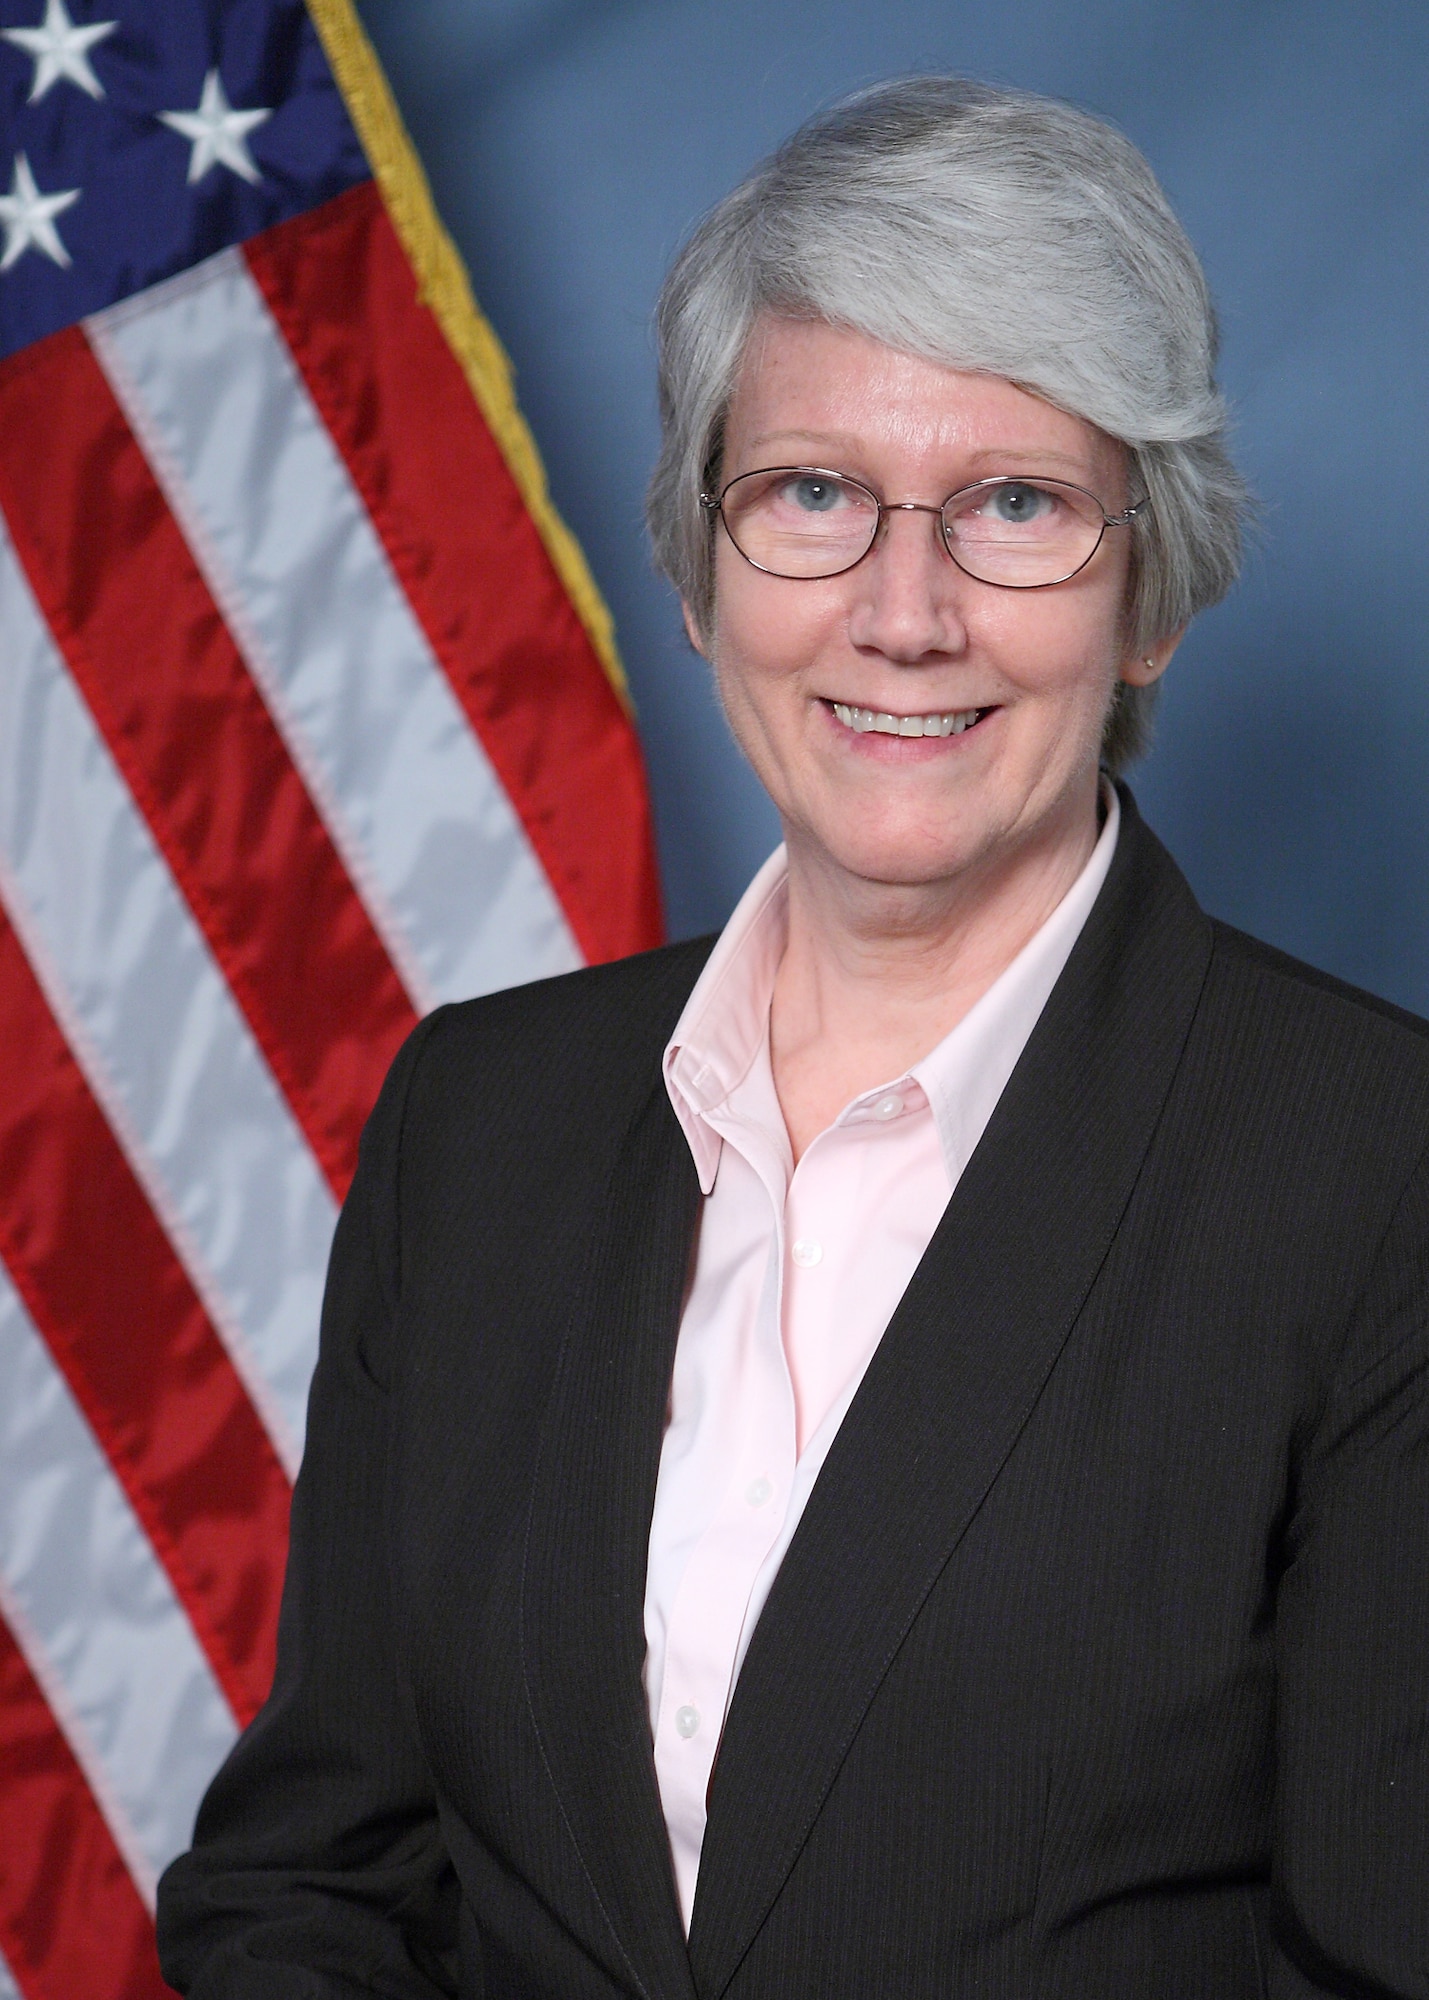 Ms. Pamela Henson will retire from Air Force Research Laboratory, following 12 years as Financial Director and Comptroller, on June 2, 2015. (U.S. Air Force photo)